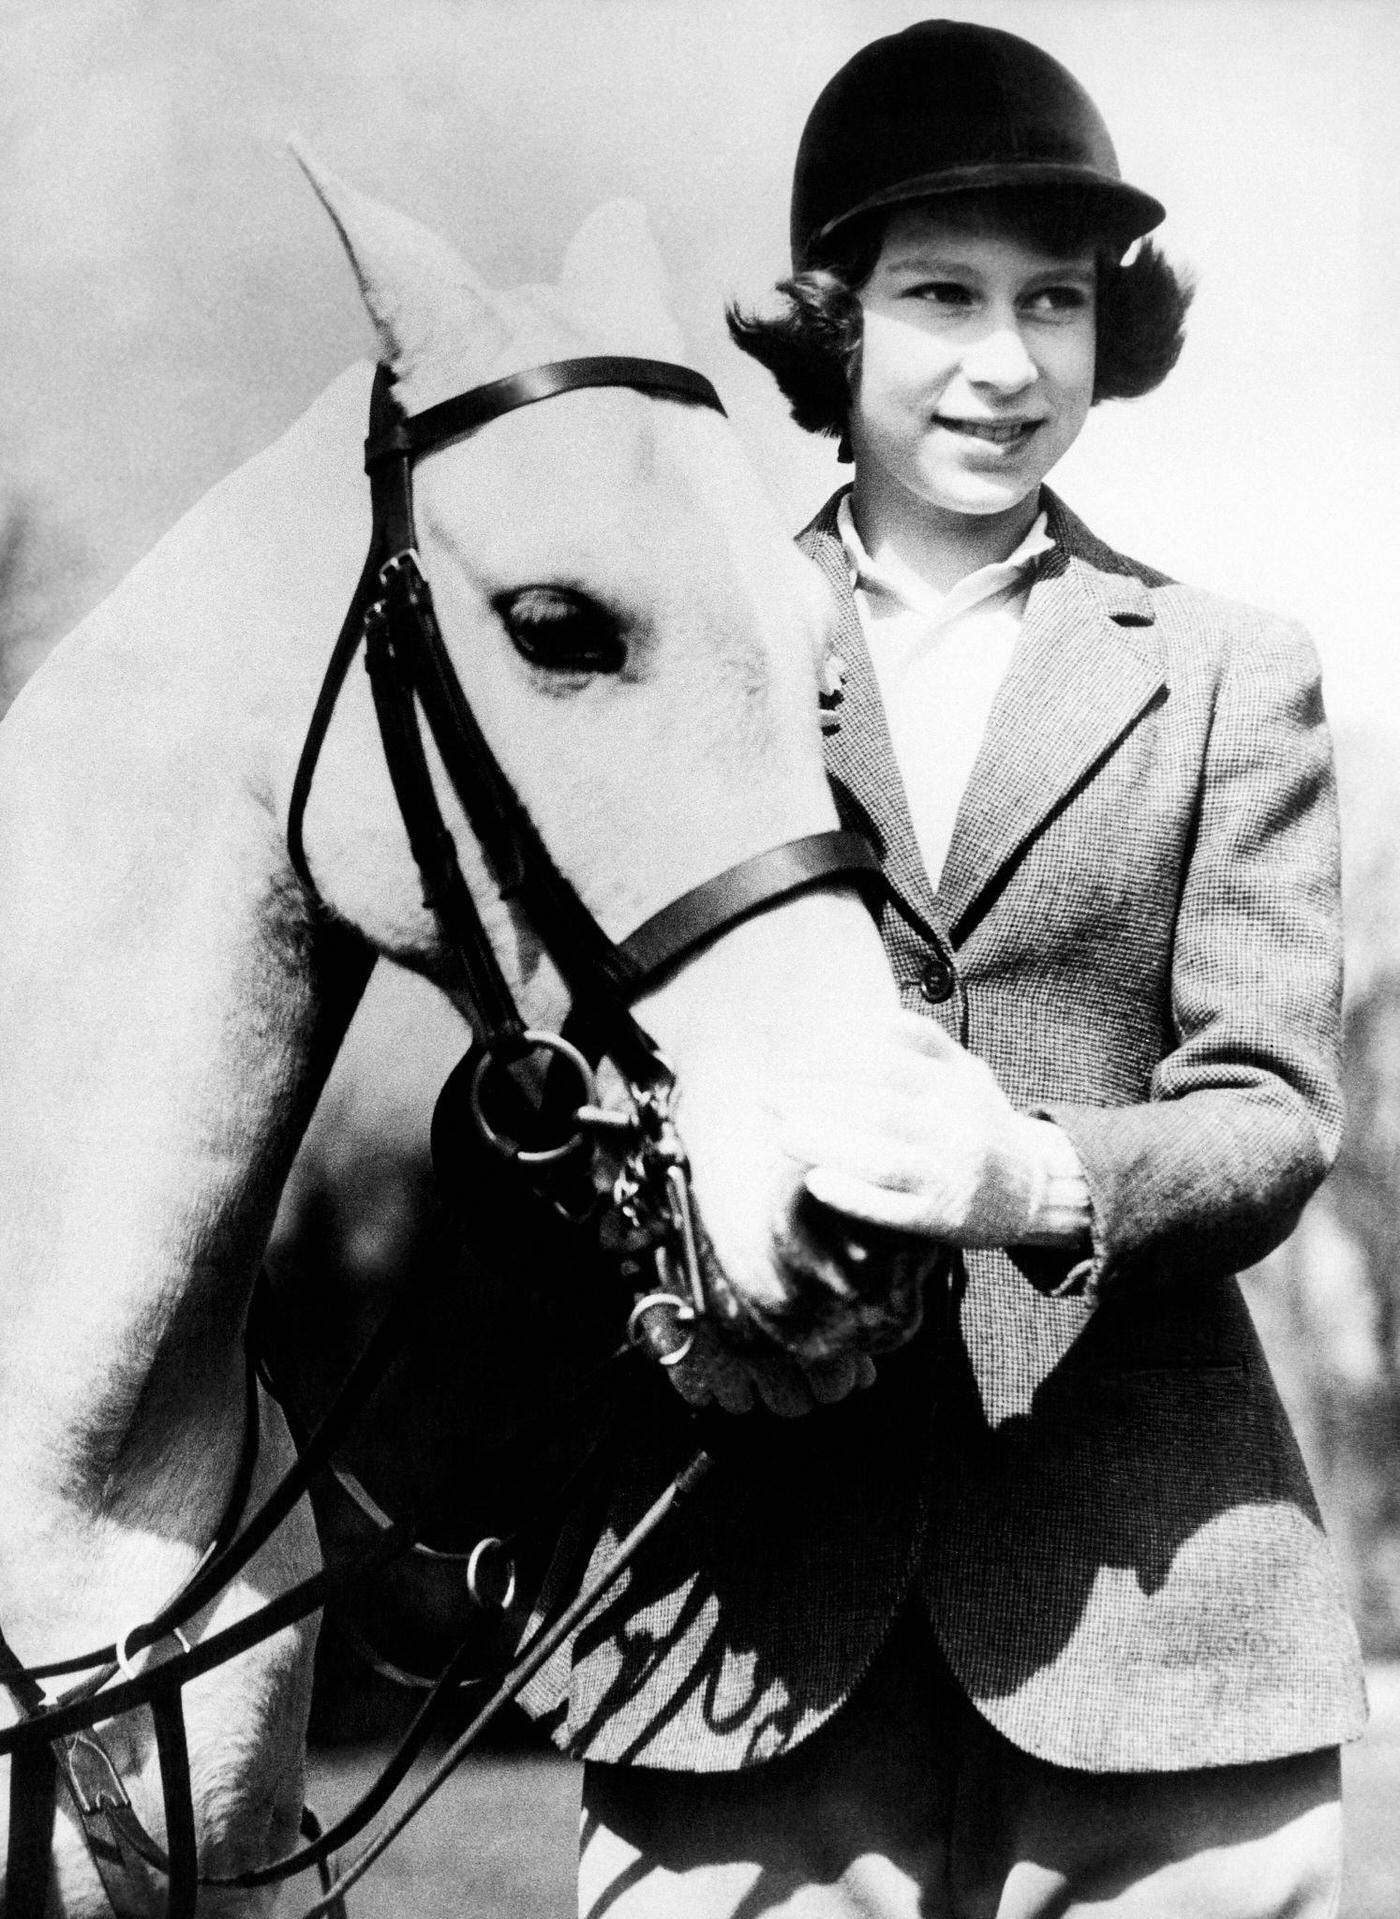 Princess Elizabeth, the future Queen Elizabeth II, in Windsor Great Park with her white pony, 1939.